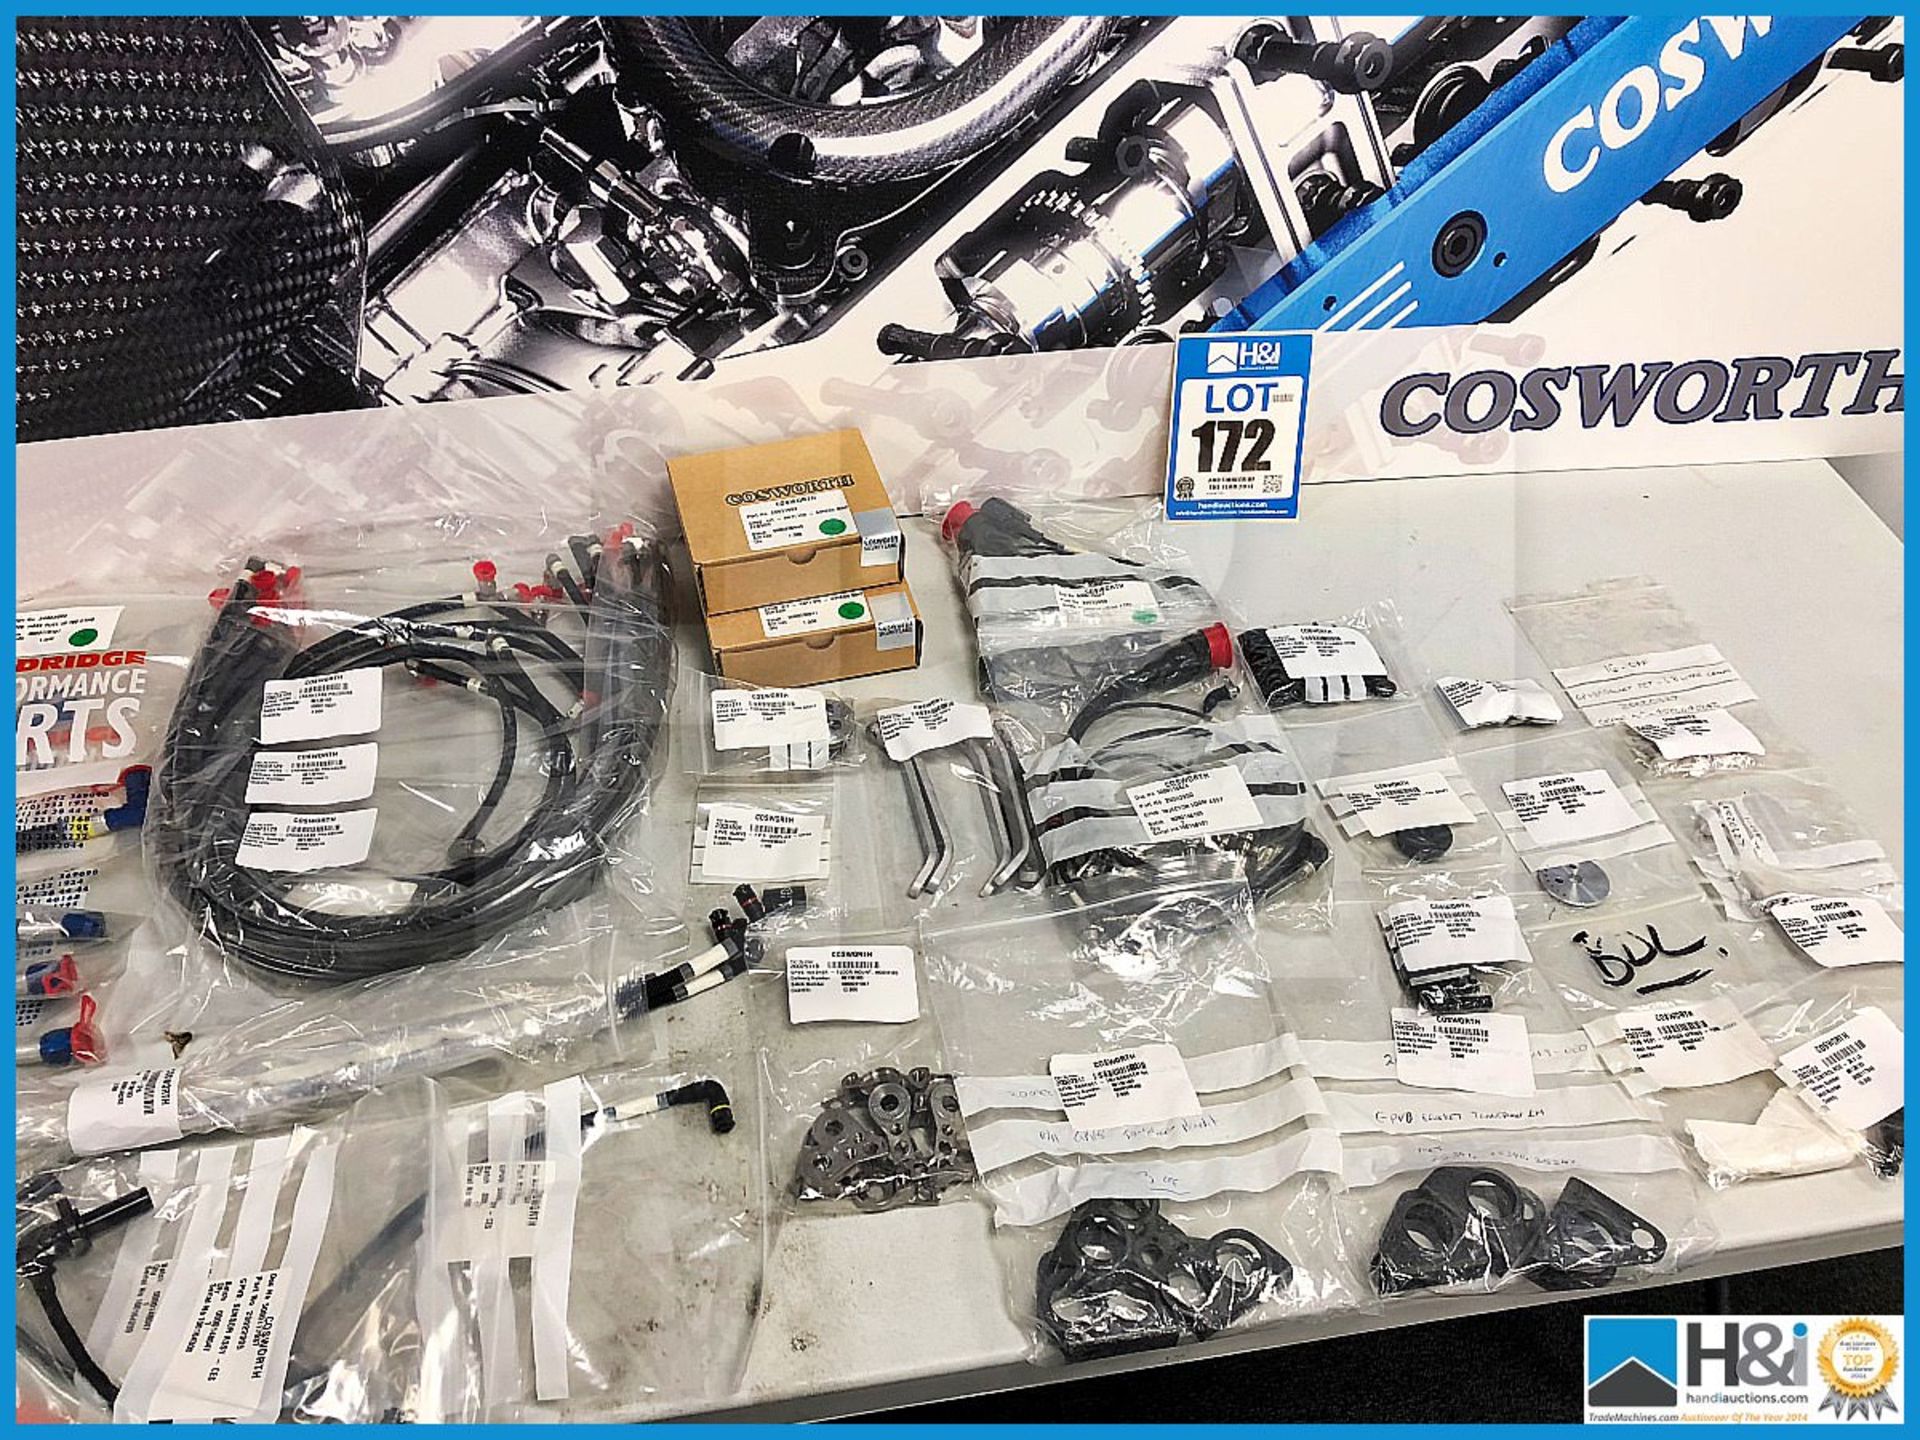 Quantity of Cosworth Lotus T125 GPV8 parts as pictured. Brand new